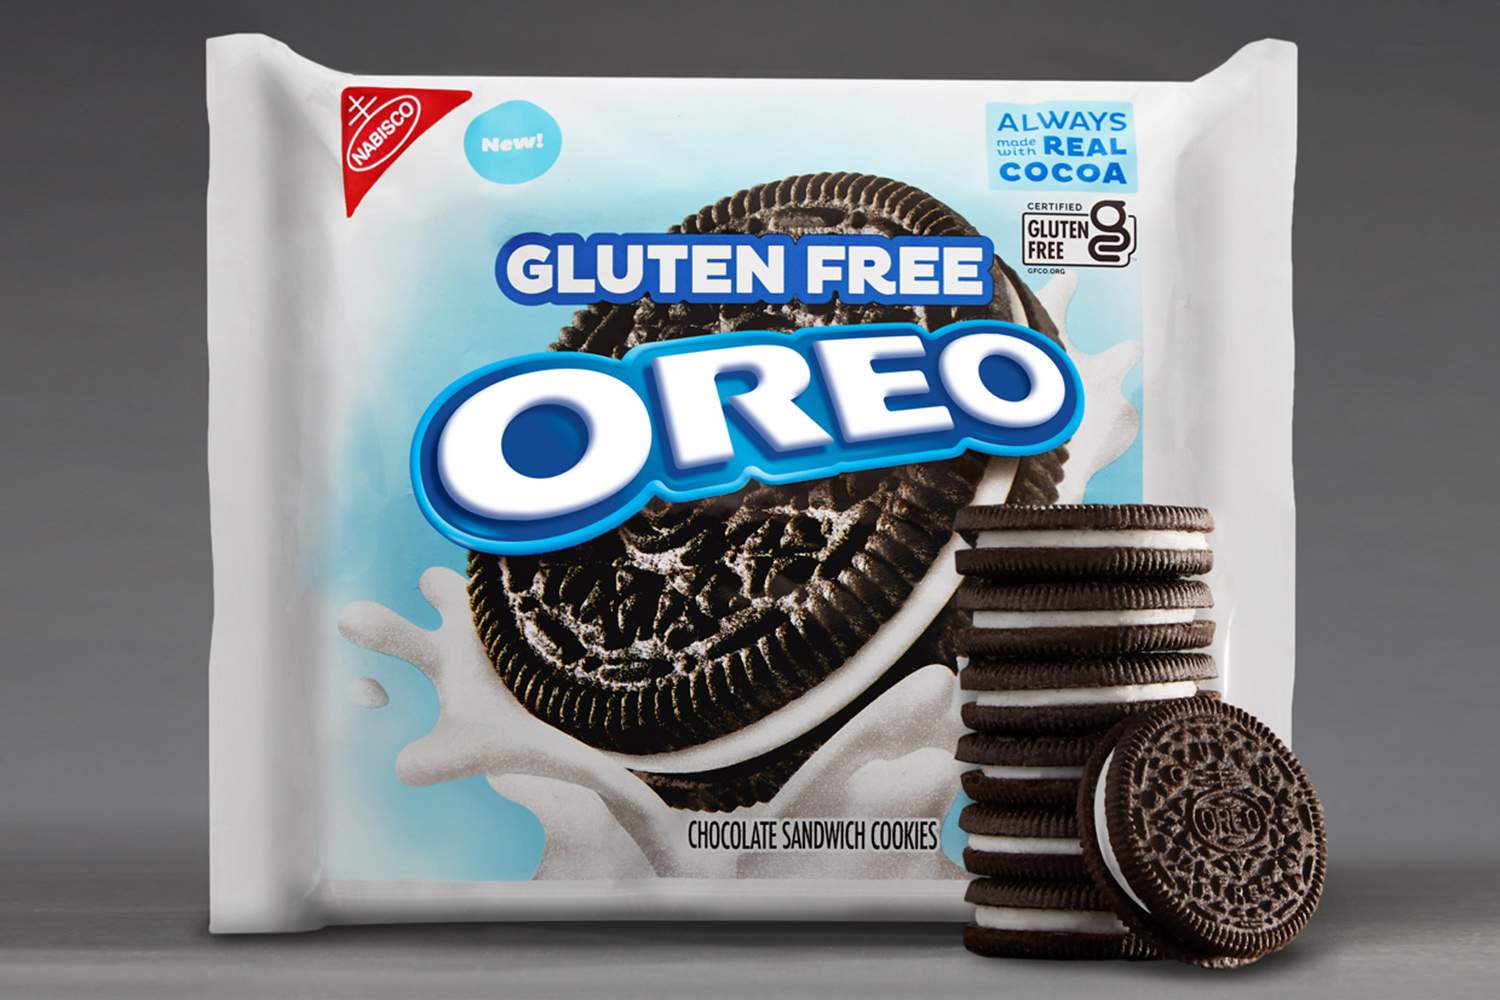 Gluten-free Oreos coming to store shelves in January 2021